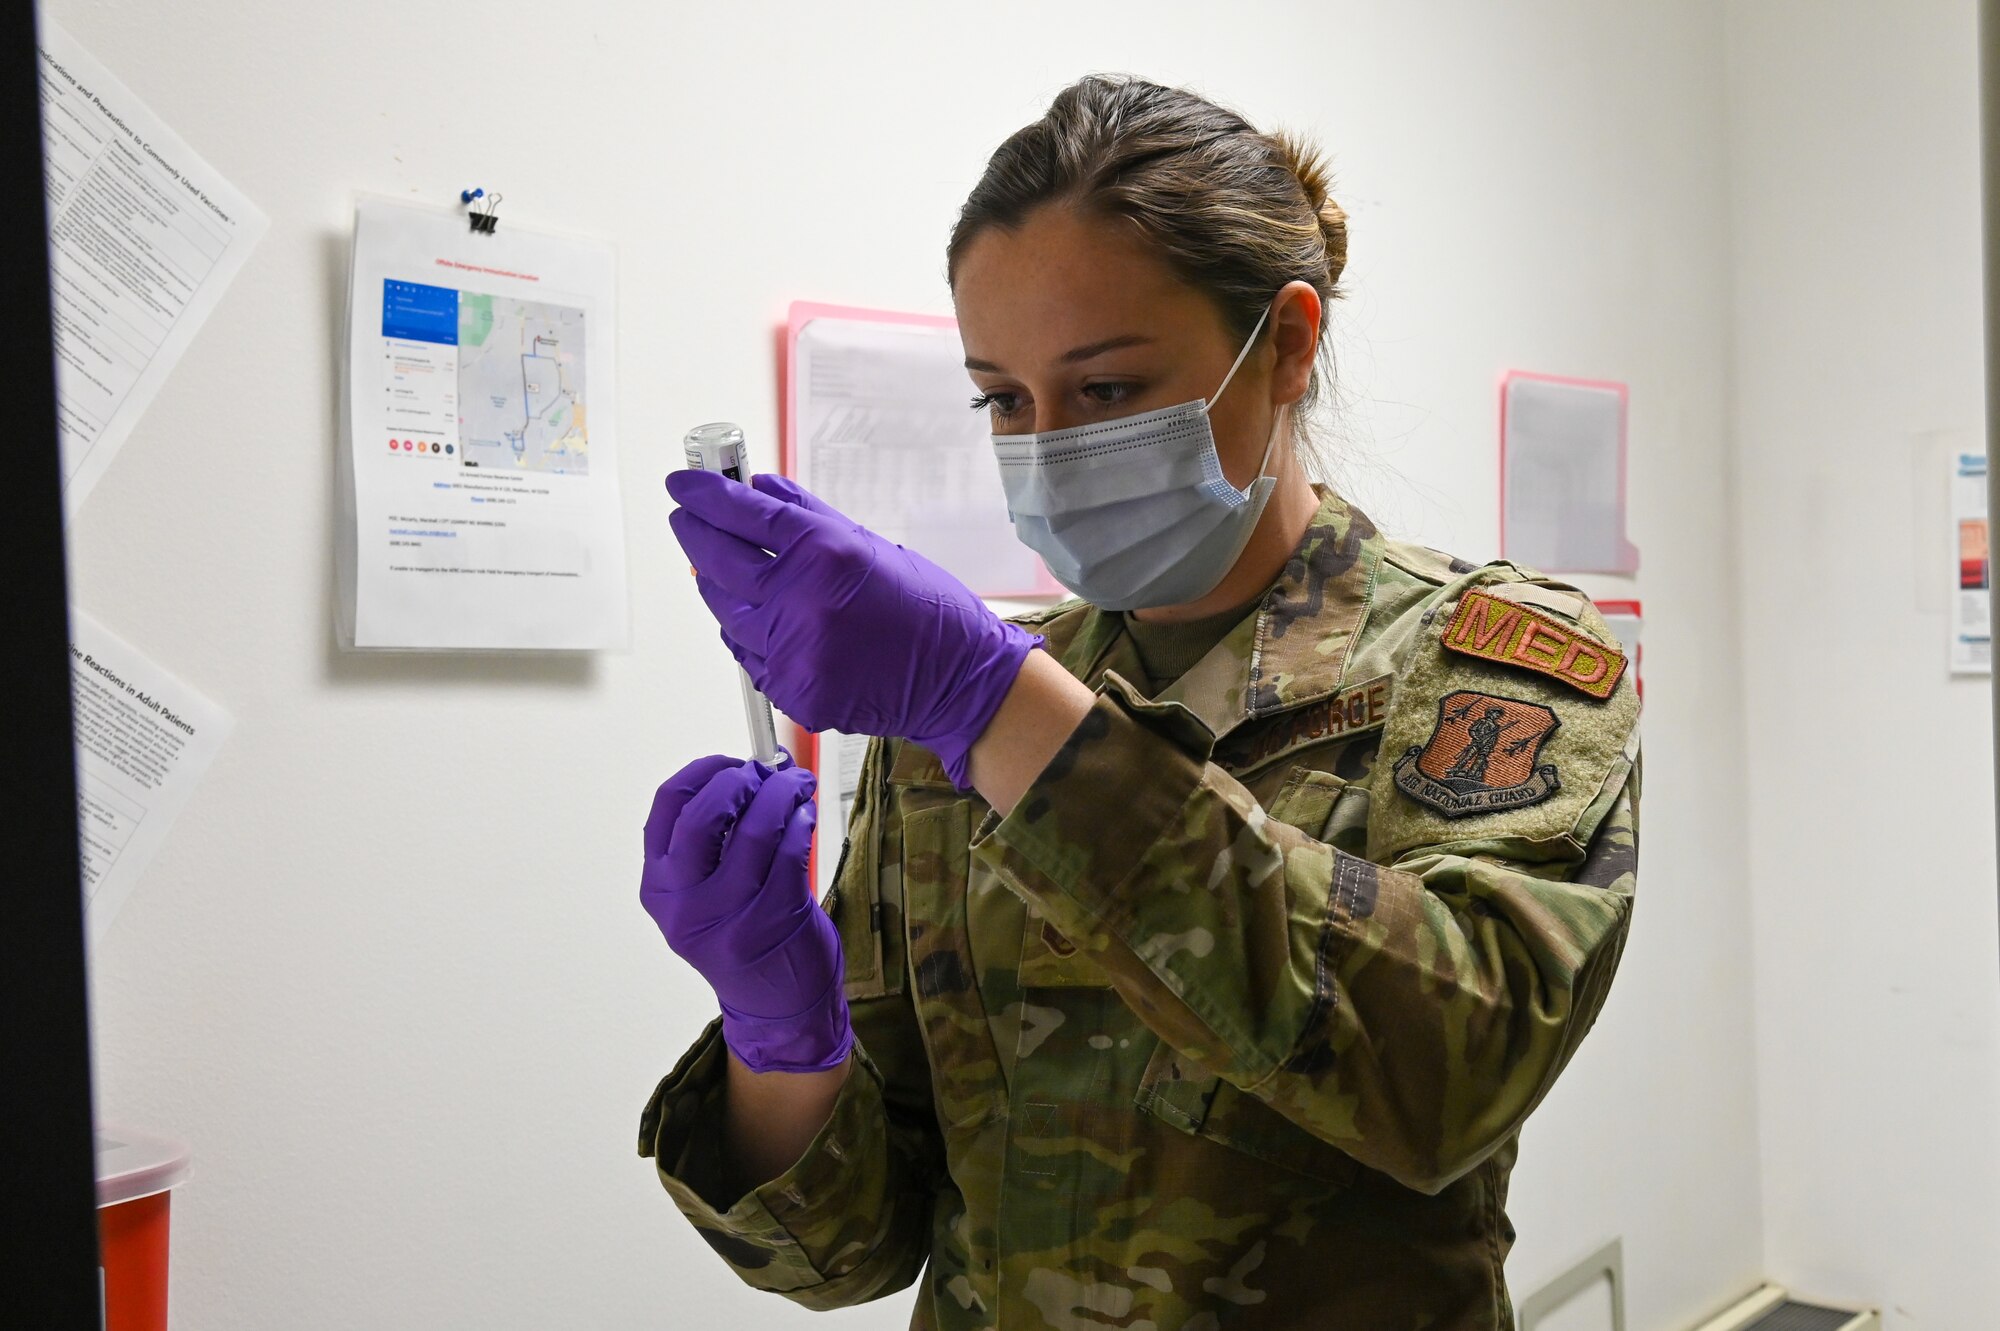 A medical technician assigned to the 115th Fighter Wing, Madison, Wisconsin, prepares to administer COVID-19 vaccines to essential military personnel Jan. 8, 2021. The Wisconsin National Guard was selected for 700 of the Moderna COVID-19 Vaccines by the Department of Defense. (U.S. Air National Guard photo by Senior Airman Cameron Lewis)